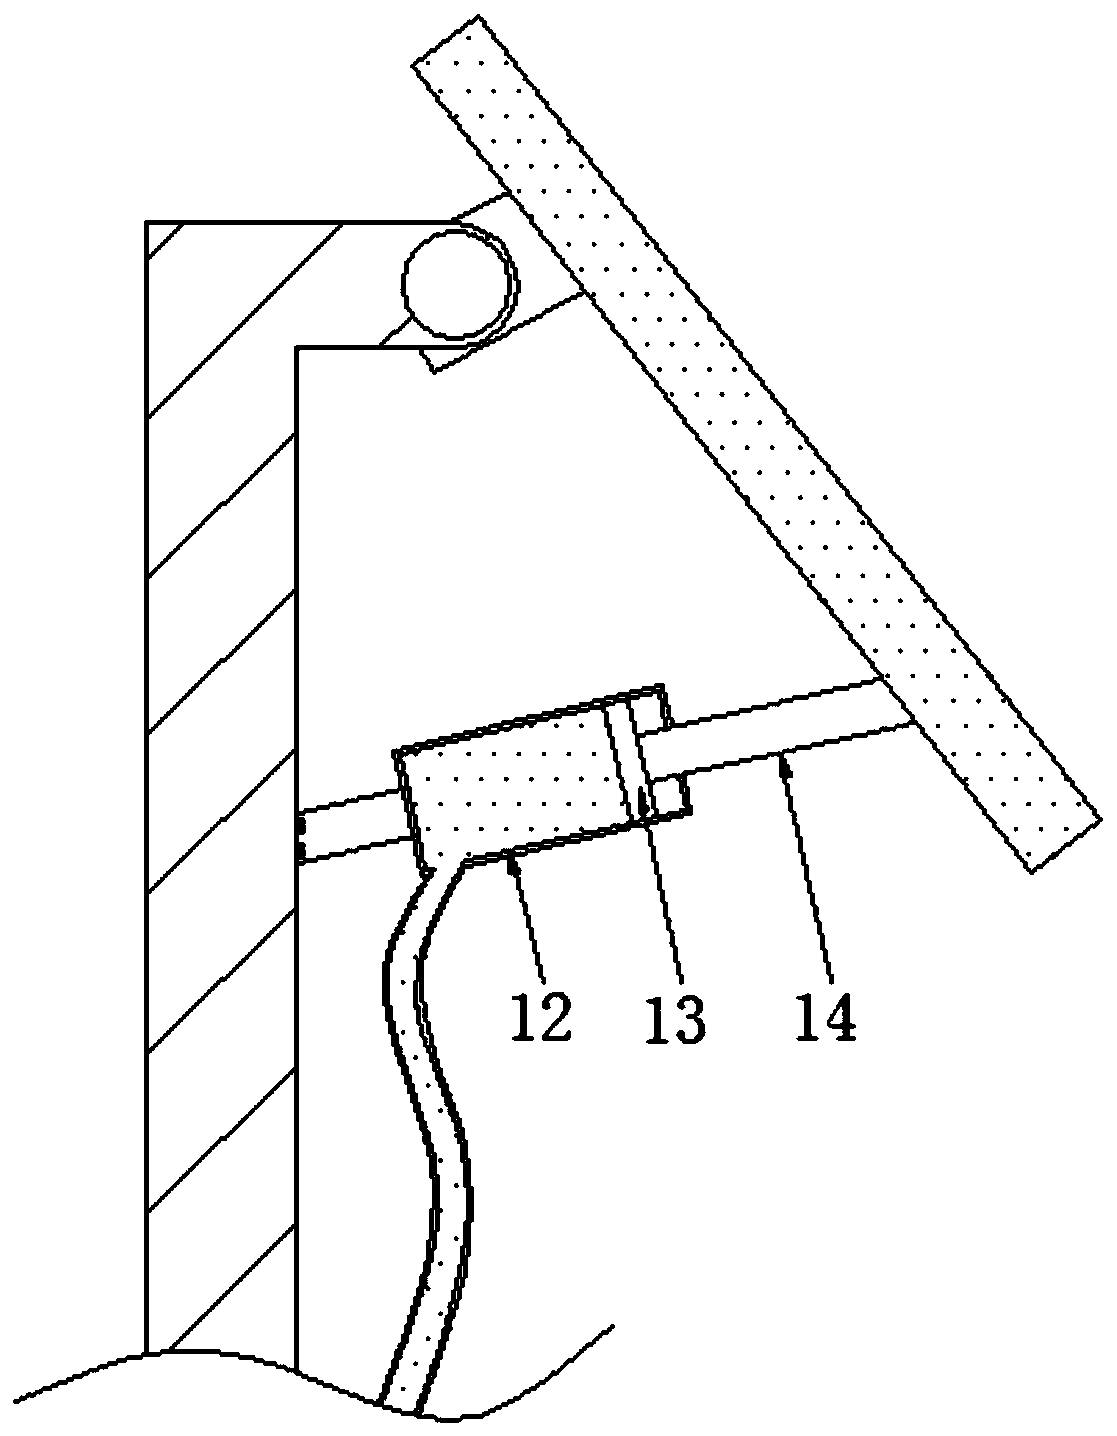 Drawing board table capable of adjusting height and angle